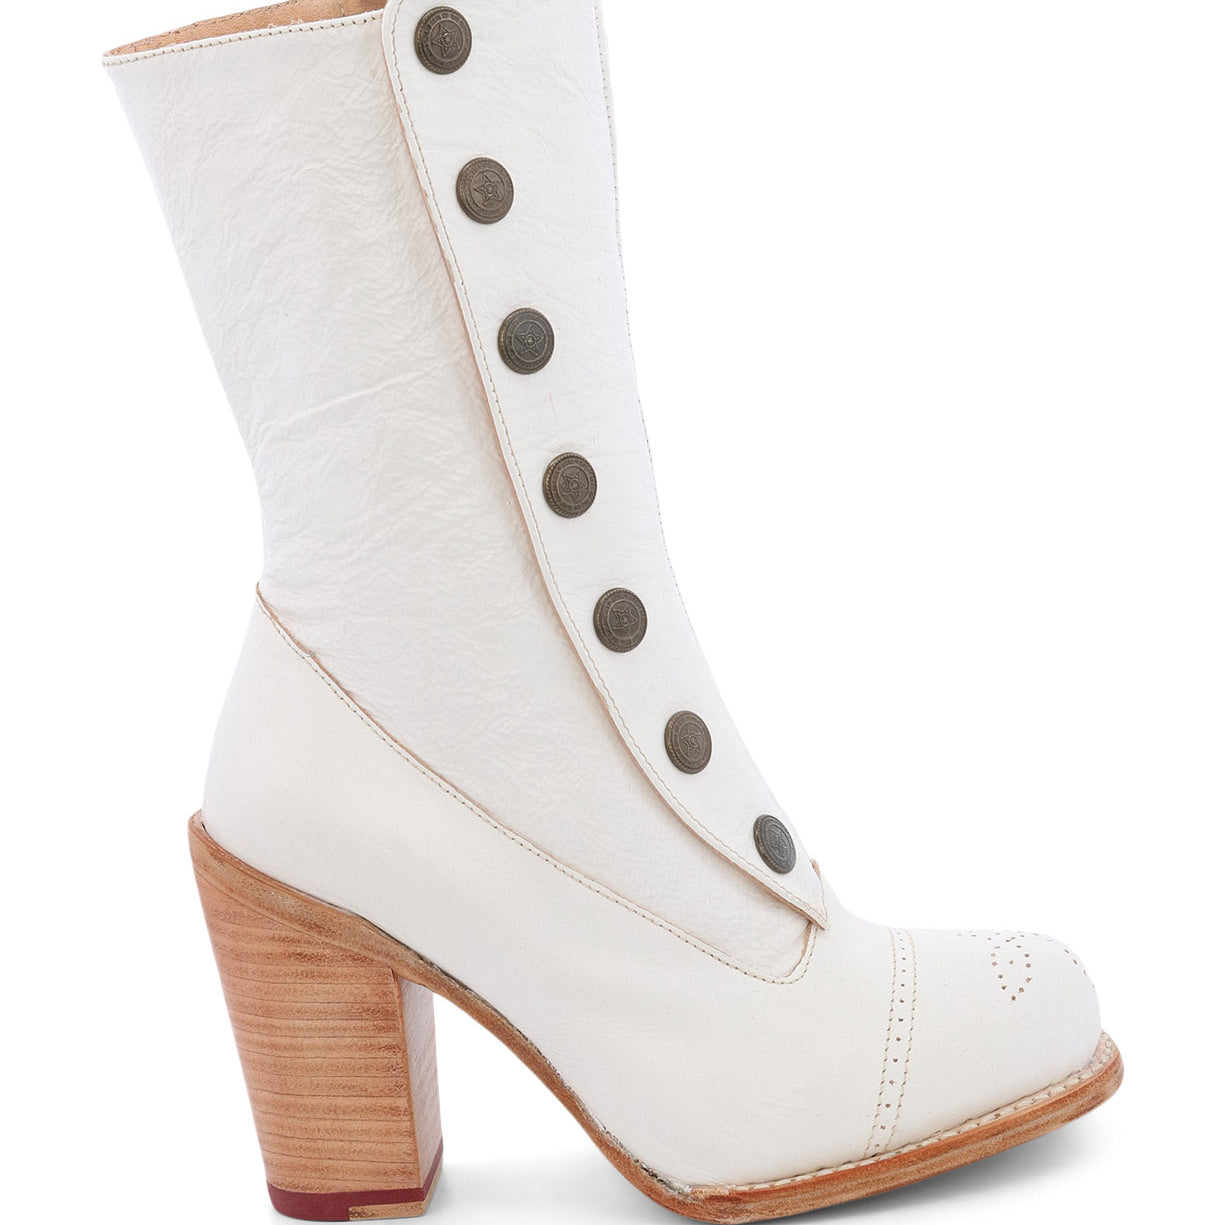 An Oak Tree Farms women's white ankle boot with wooden buttons in a two-tone color named Amelia.